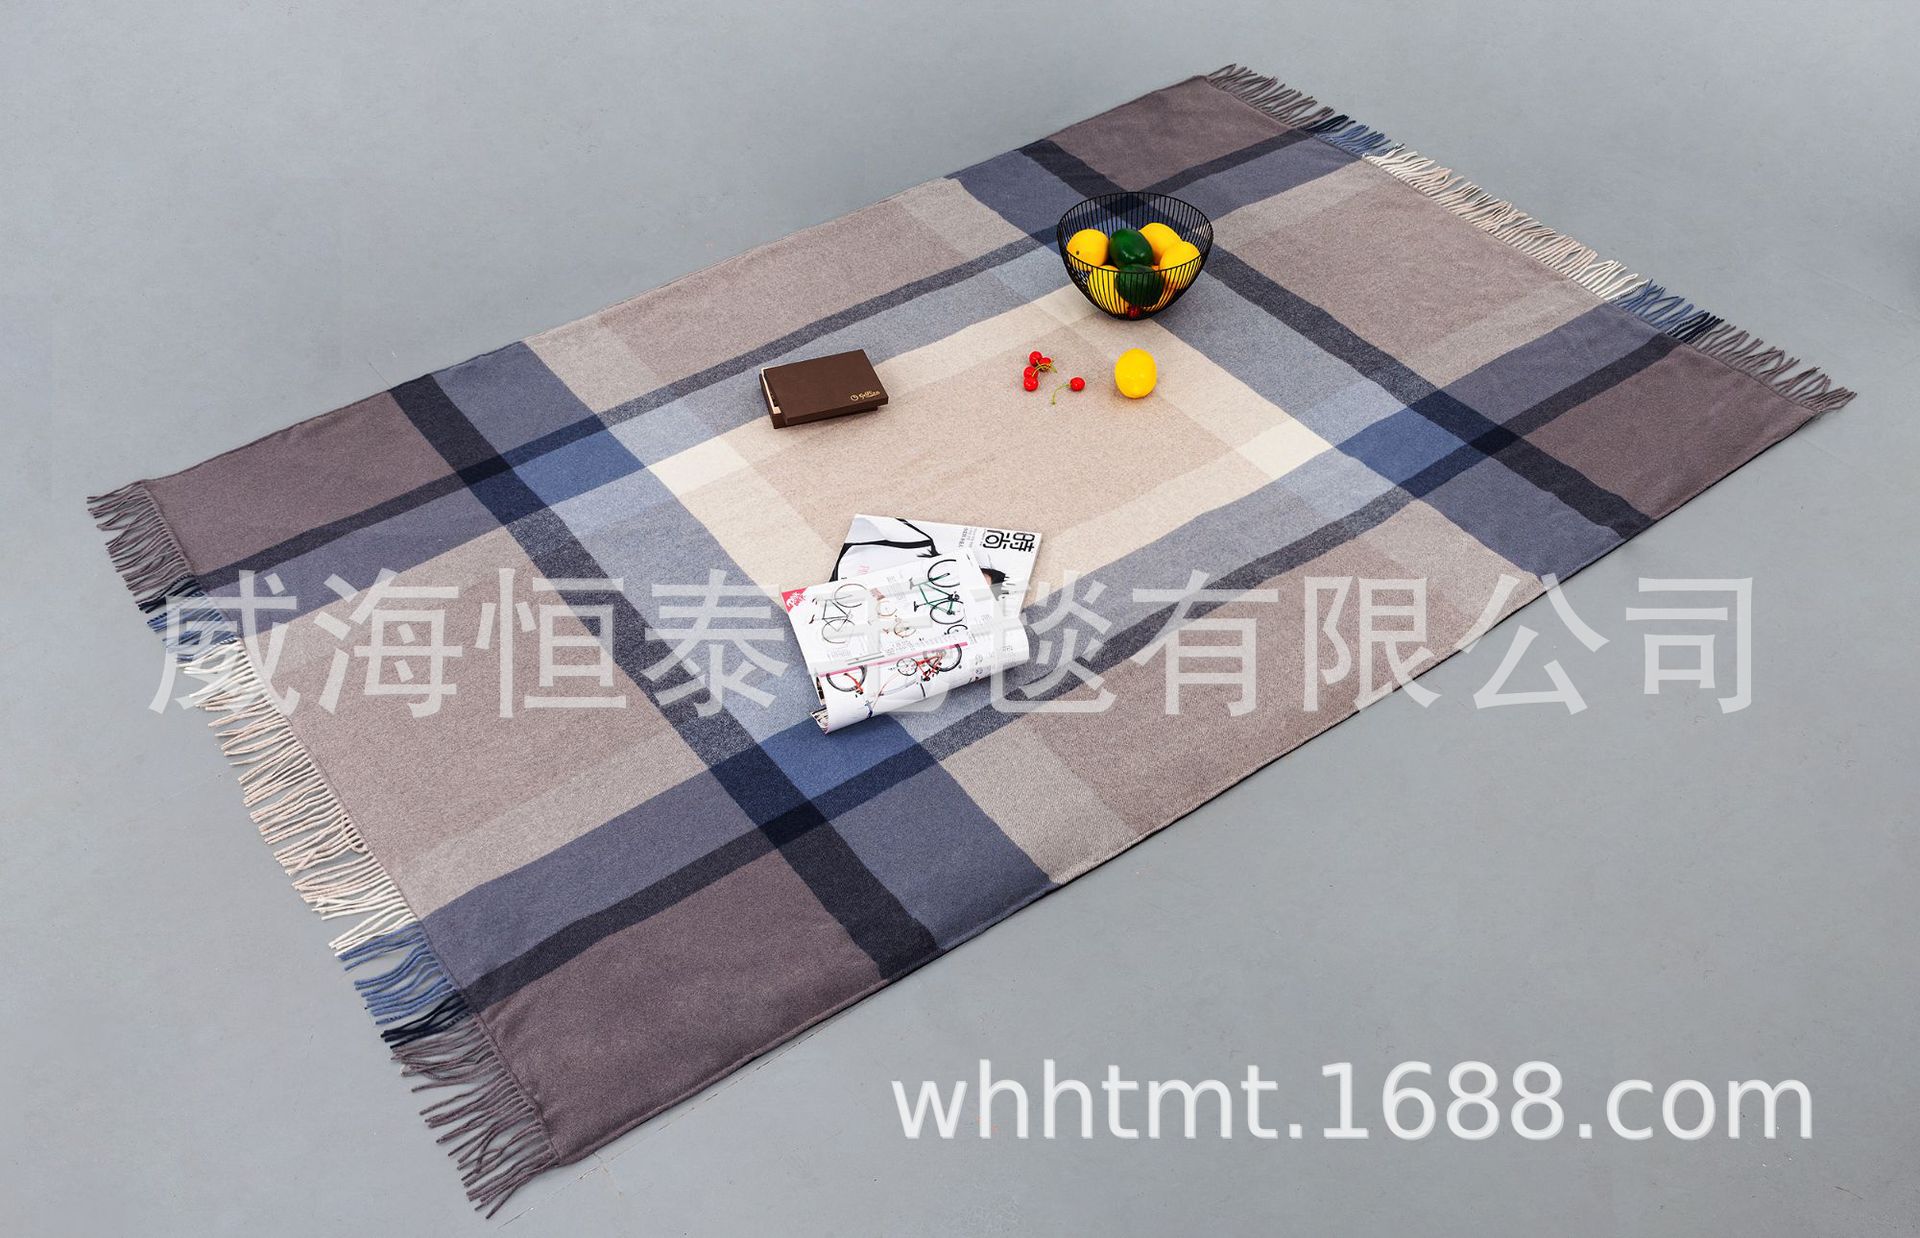 Processing Customized Portable Outdoor Picnic Mat Moisture Proof Pad Picnic Blanket Waterproof Machine Washable Floor Mat Park Camping